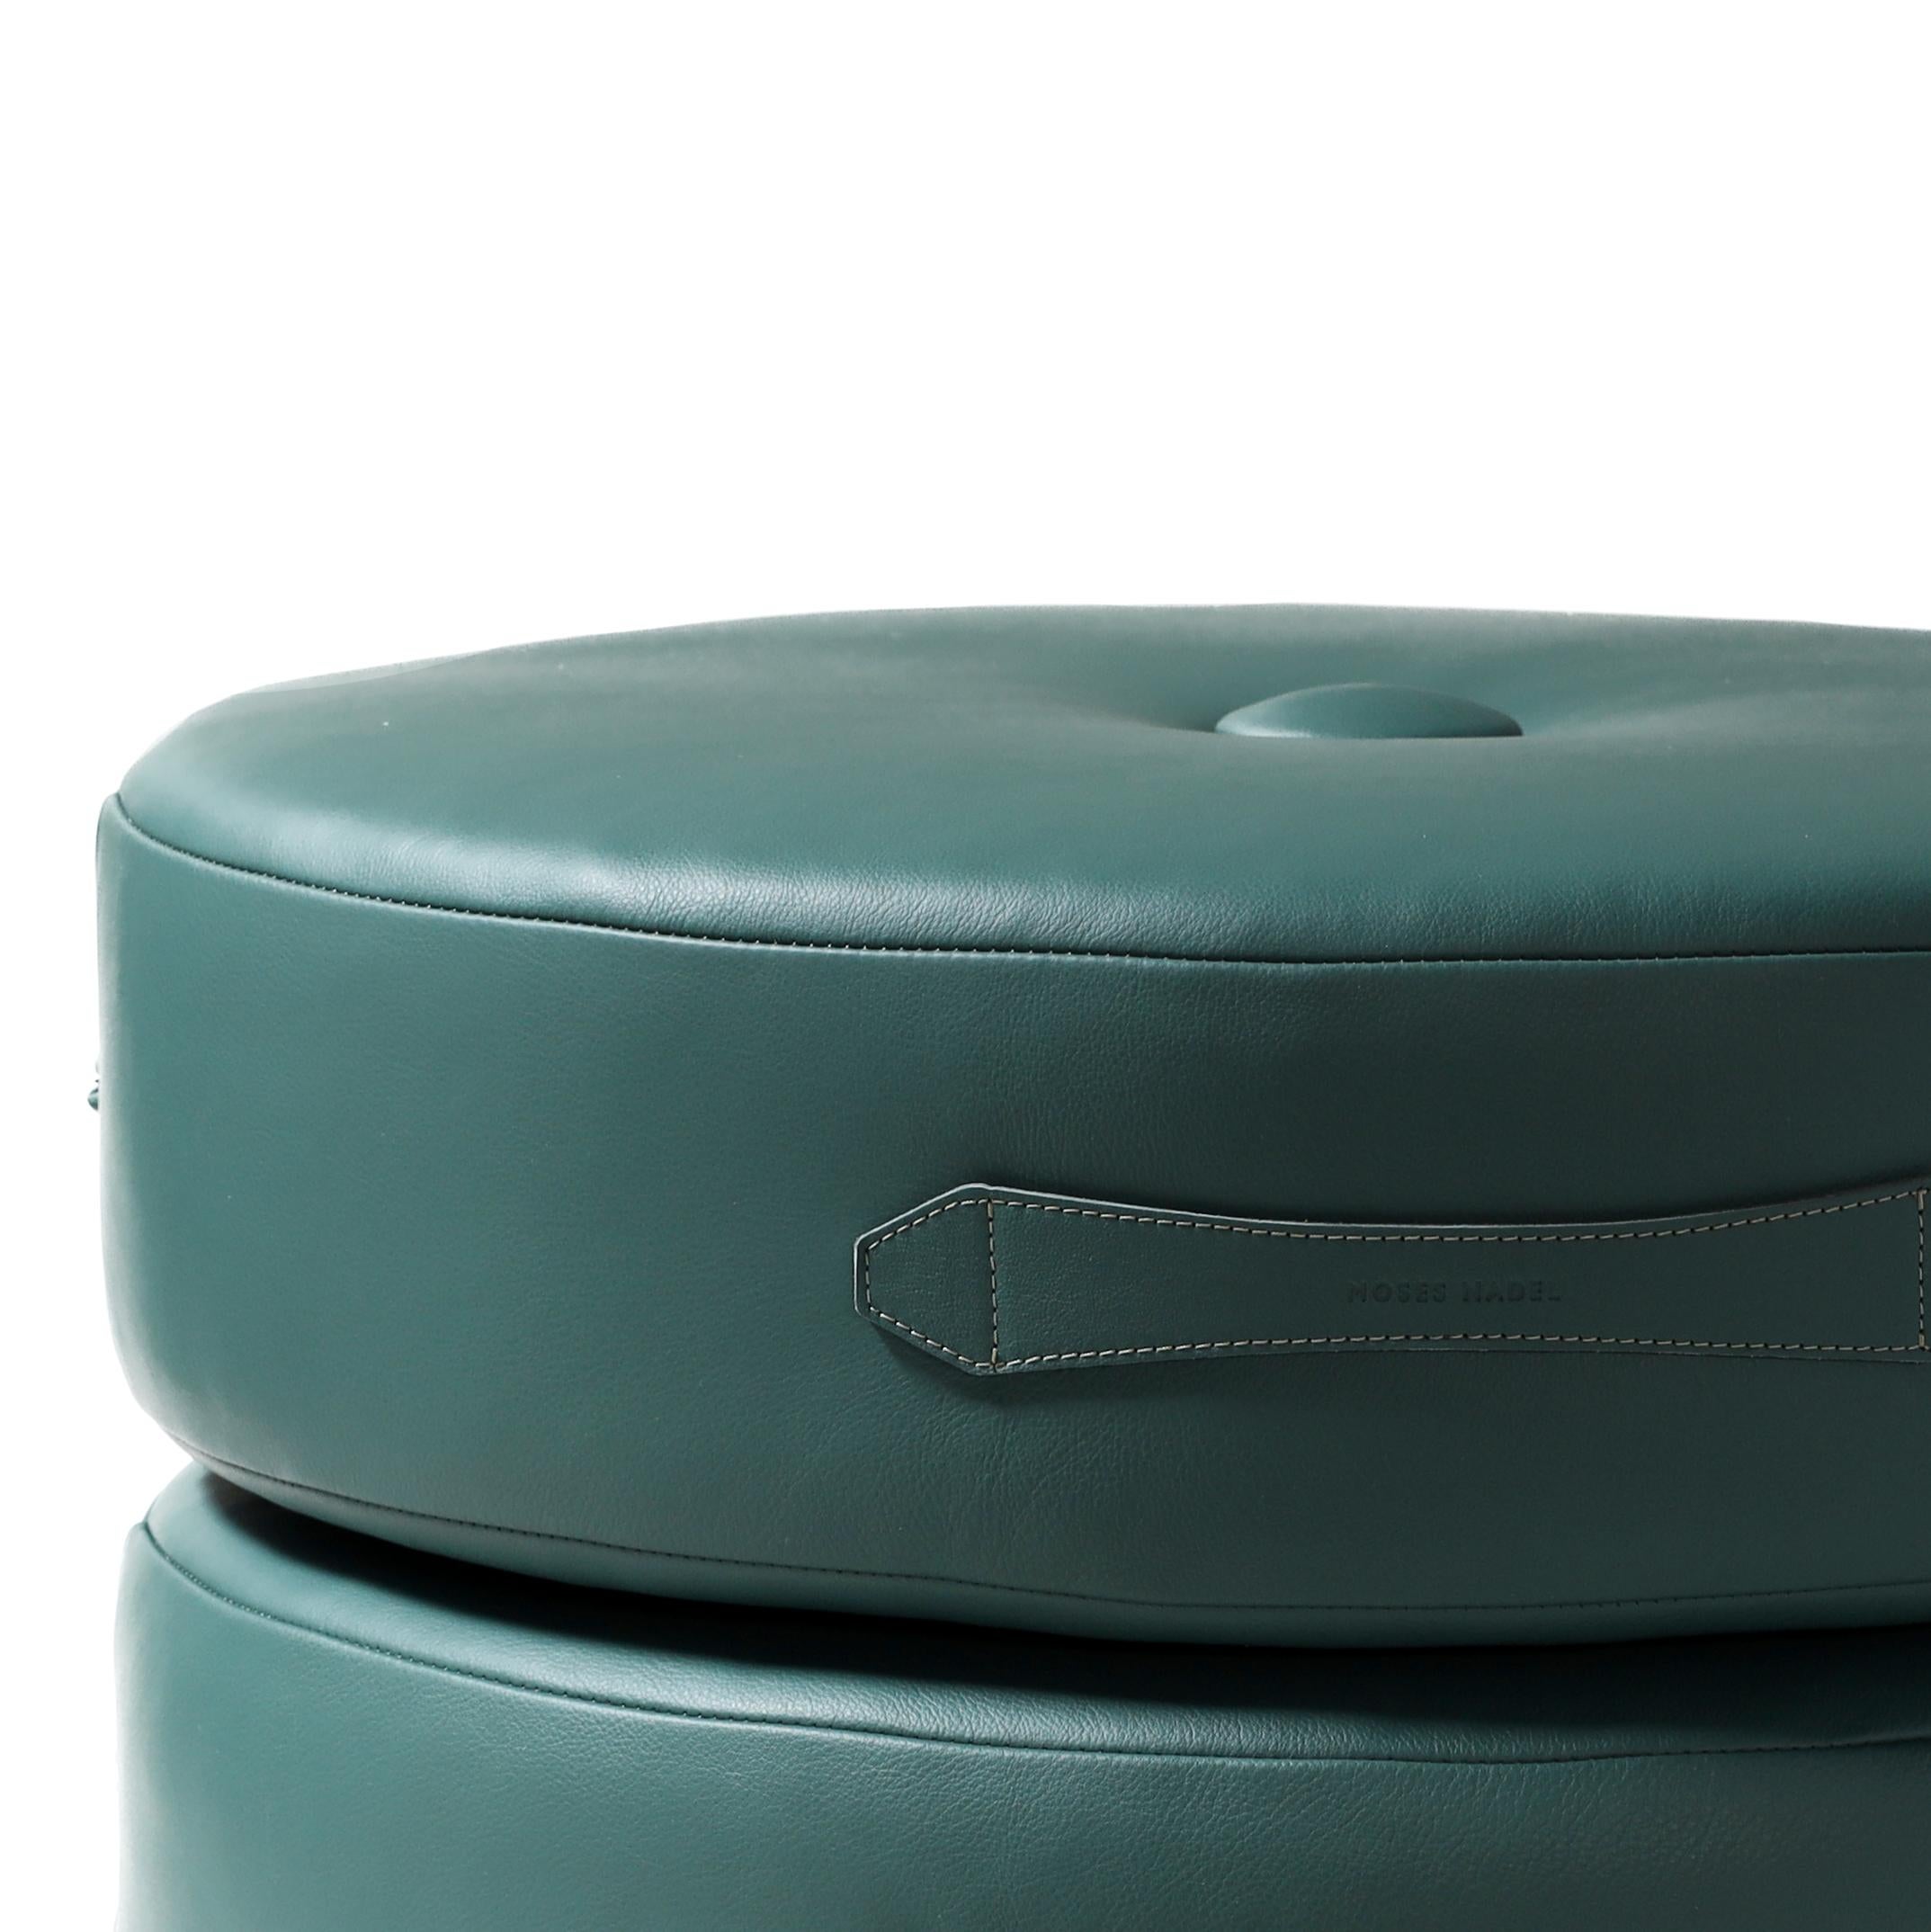 Stacked to store or sit and individual to use for low seating, this set of two, round leather floor cushions can easily be moved to meet your needs. Color palette top to bottom: Seaweed Green leather (also featured in Light Cocoa leather and